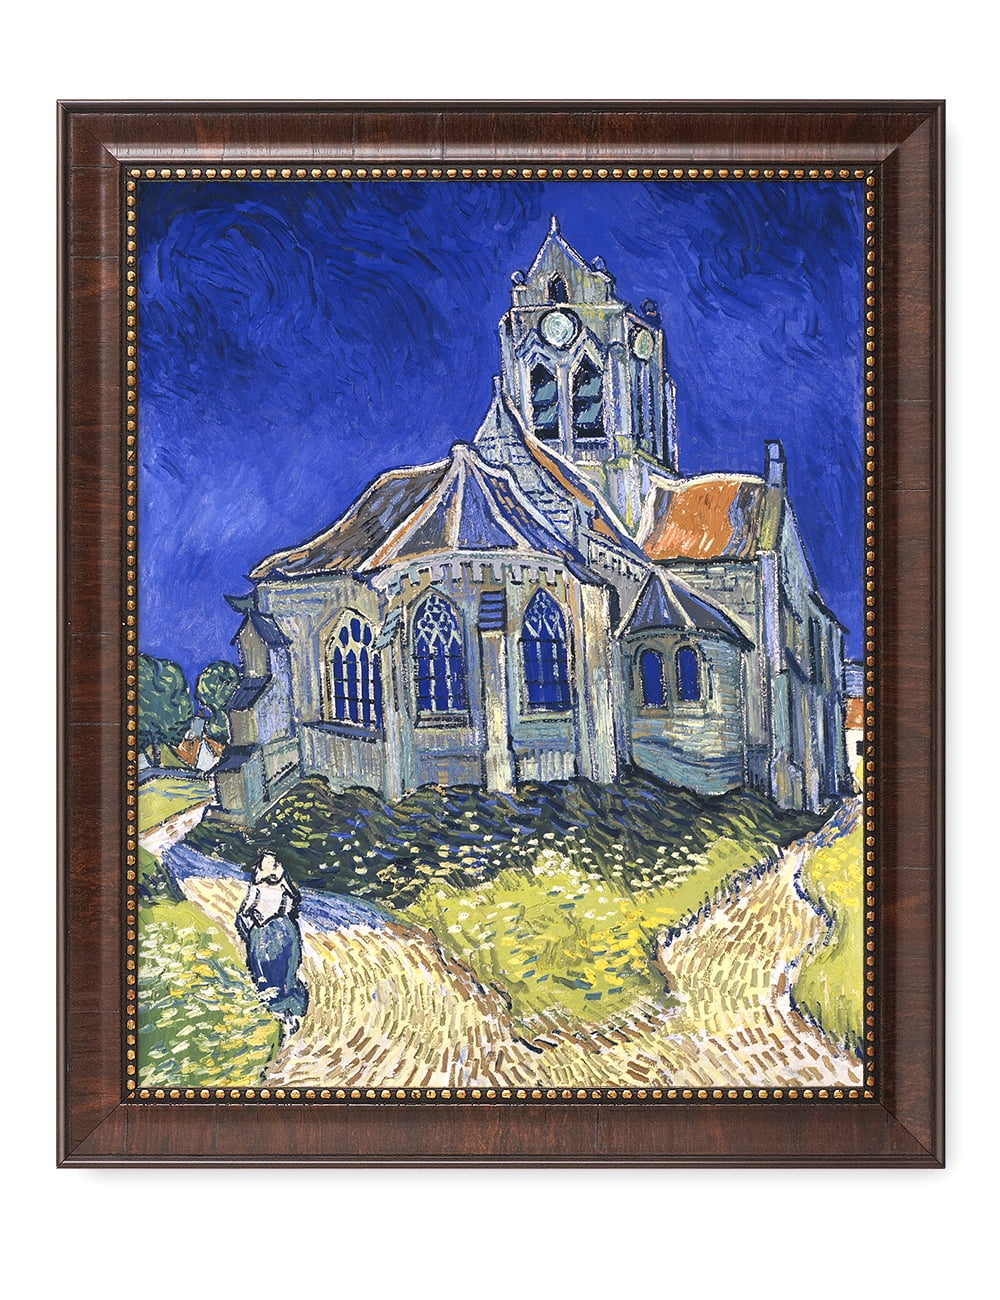 DECORARTS The Church at Auvers Vincent Van Gogh Giclee Prints w/  Antique Brown Frame for Wall Decor. Picture Size: 16x20